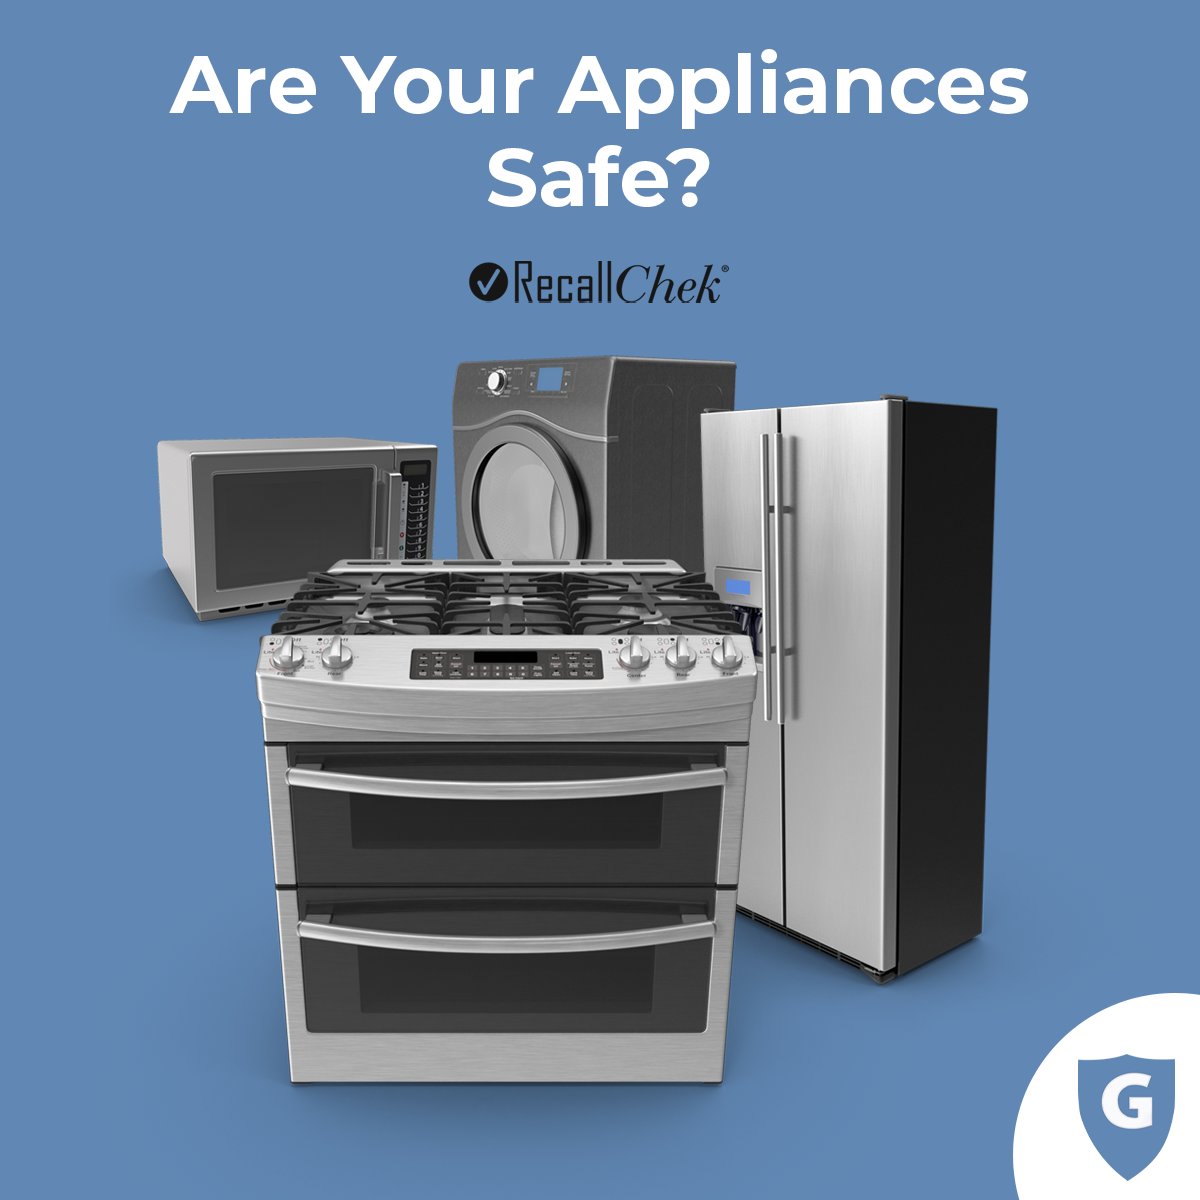 Ensure your home appliances stay safe! Enroll now for alerts on recalls and other safety risks. Dial 912-223-3012 & inquire about Recall Chek. Have a fantastic day! #RecallChek #WeLookBetter #Guardian #HomeInspector #StSimons 🏡🔍✅🚨